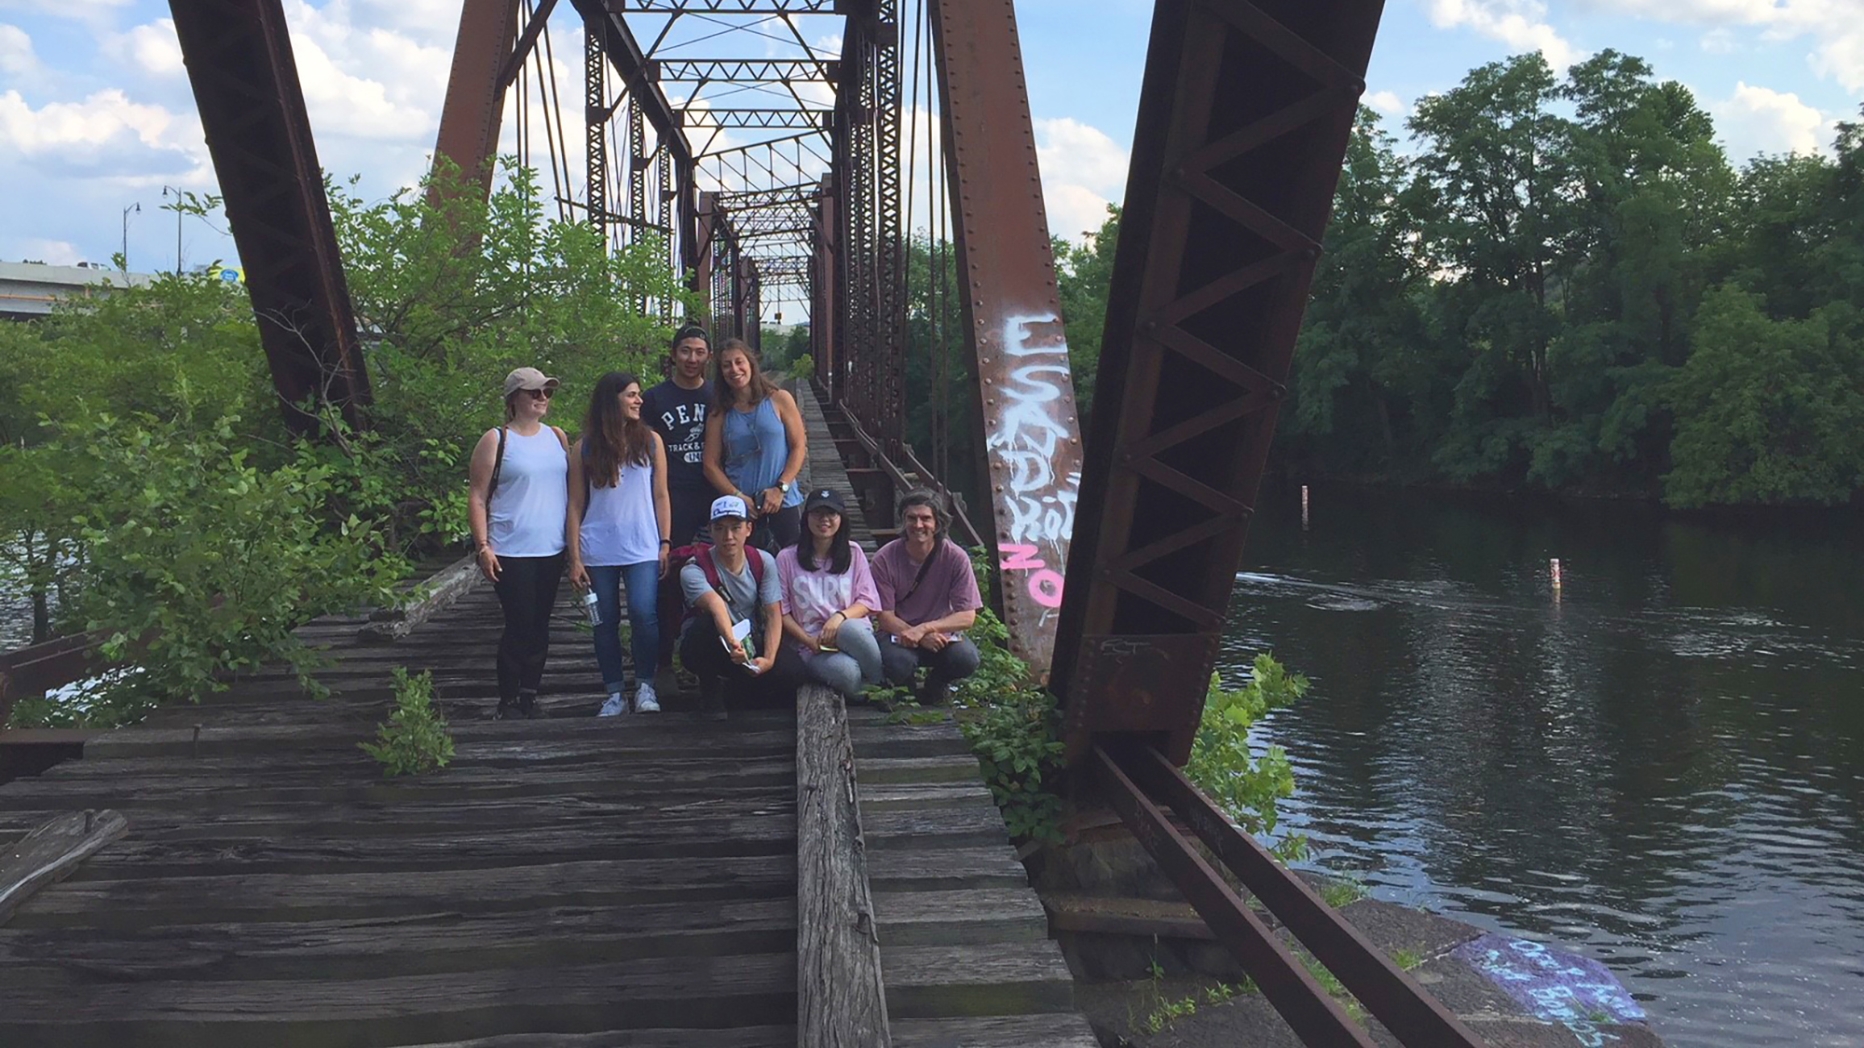 A group of people posing on a train bridge